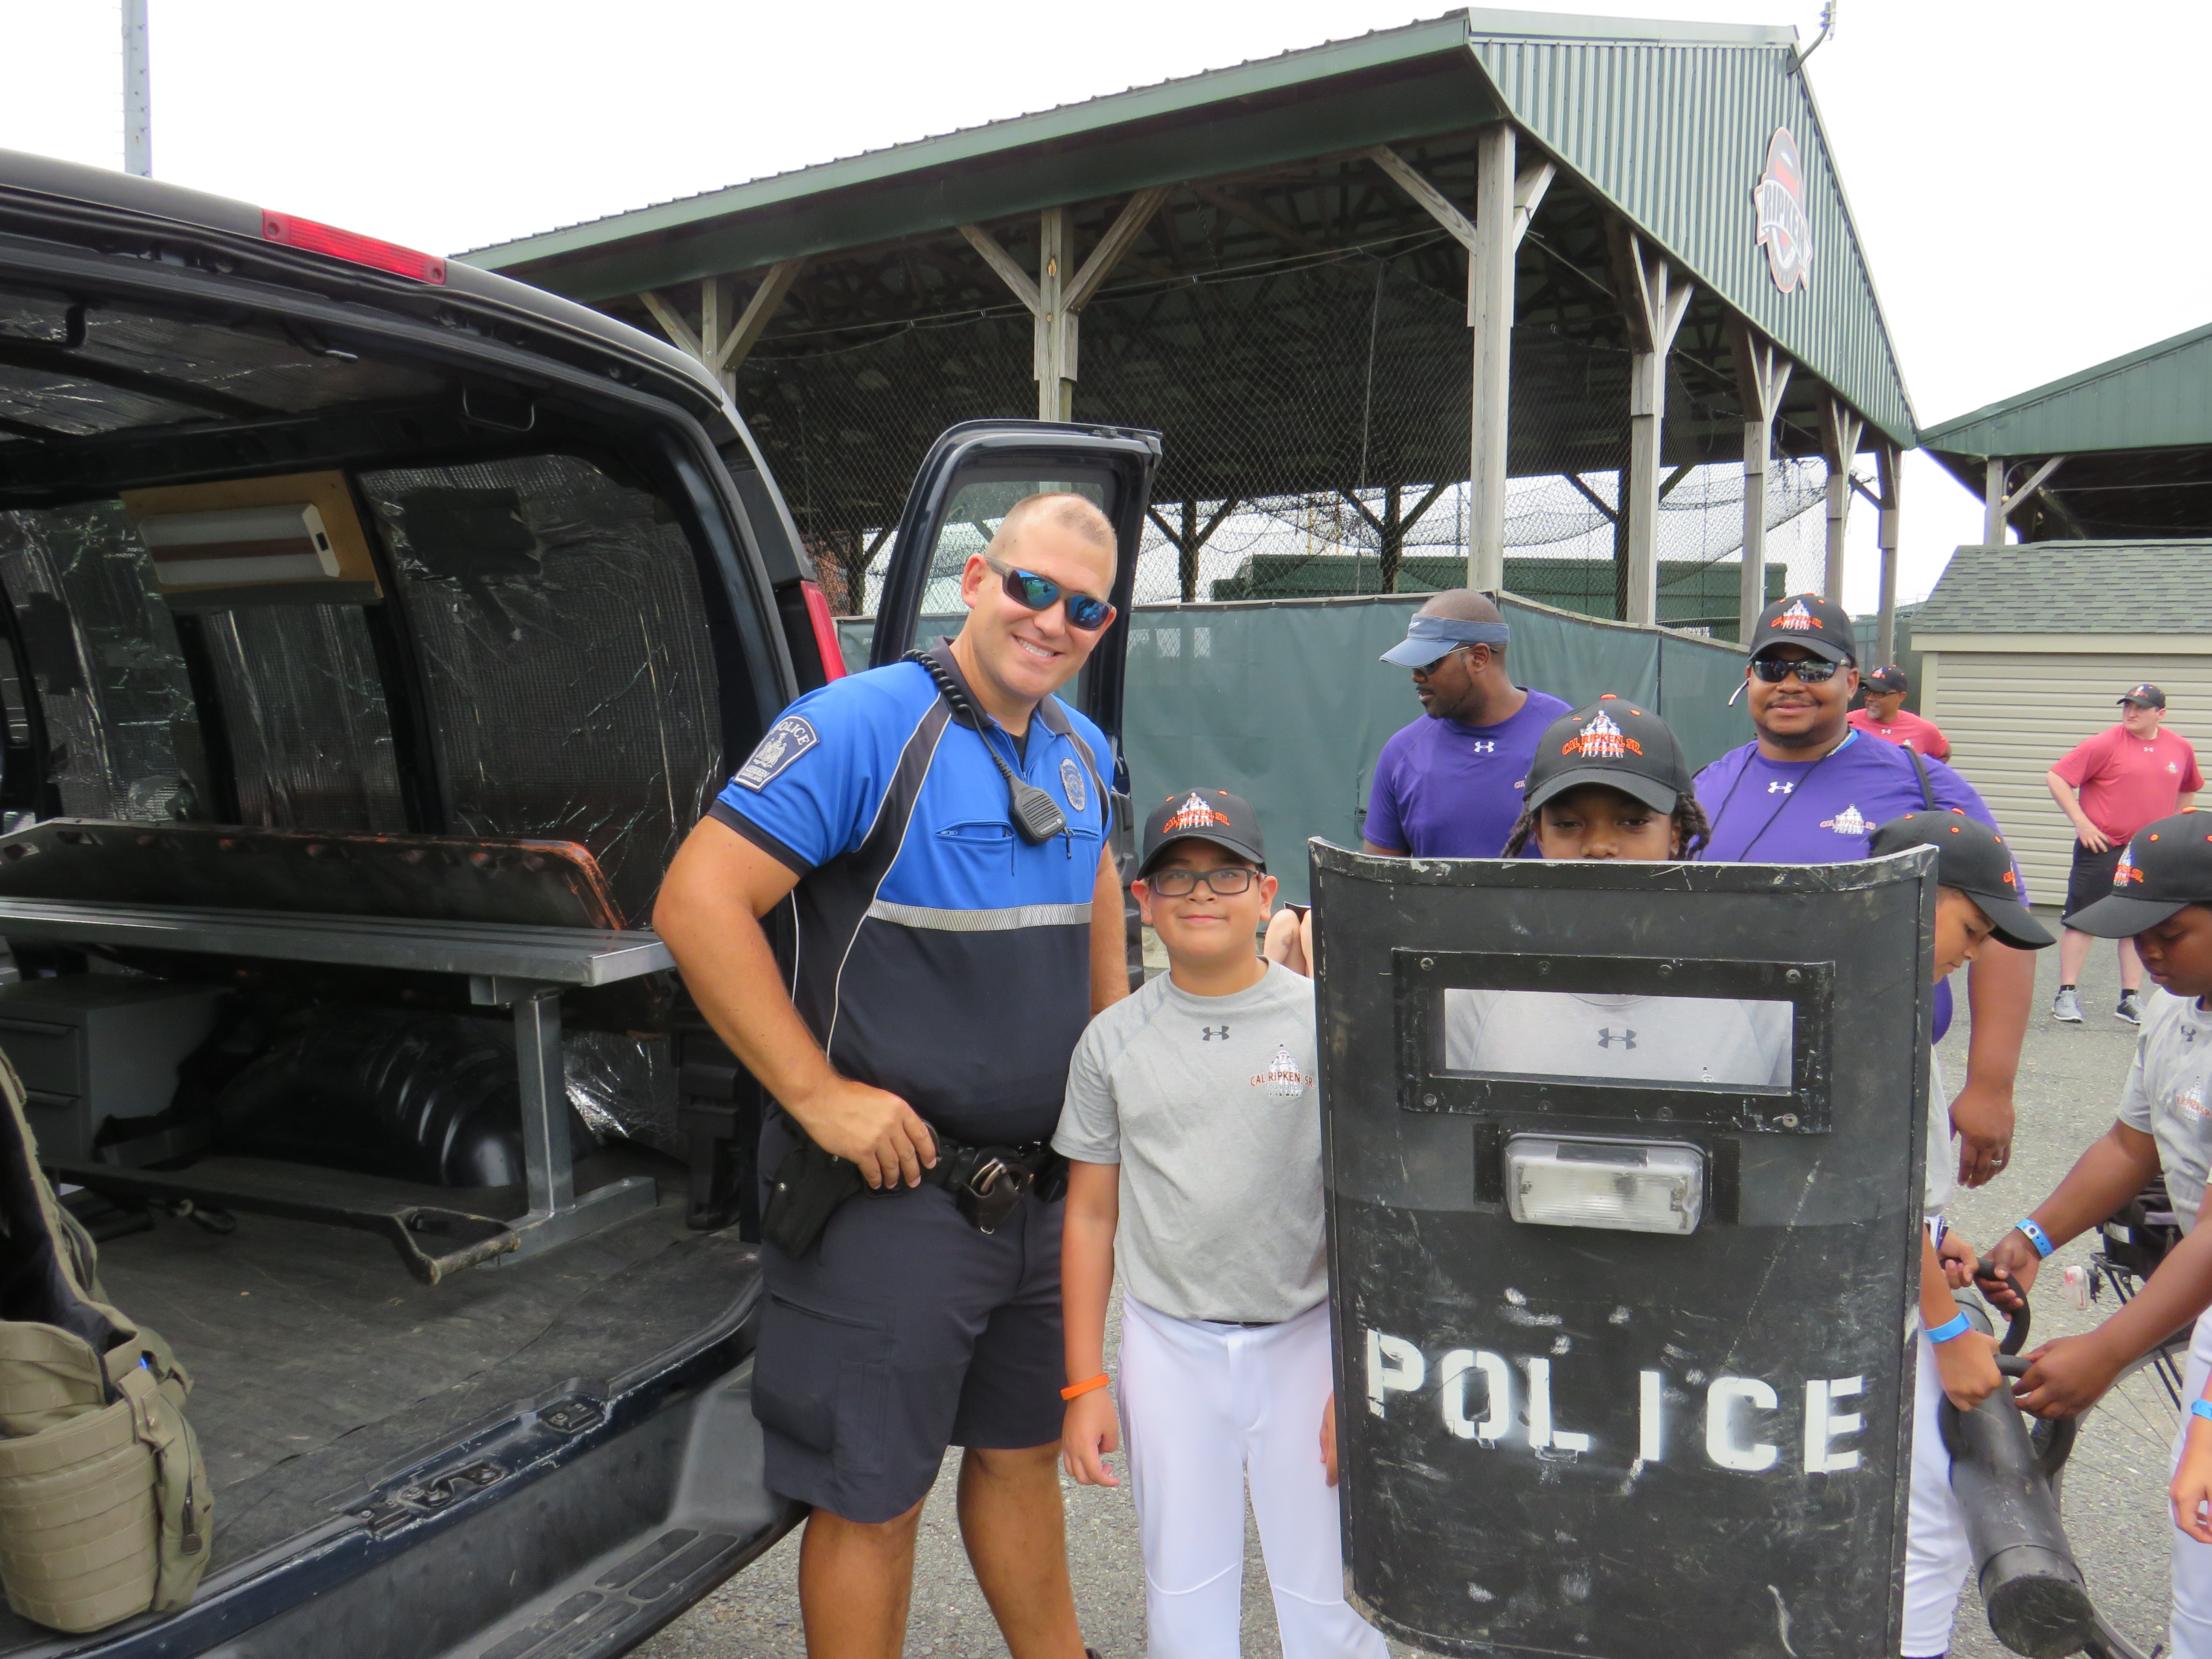 kids with cop shield